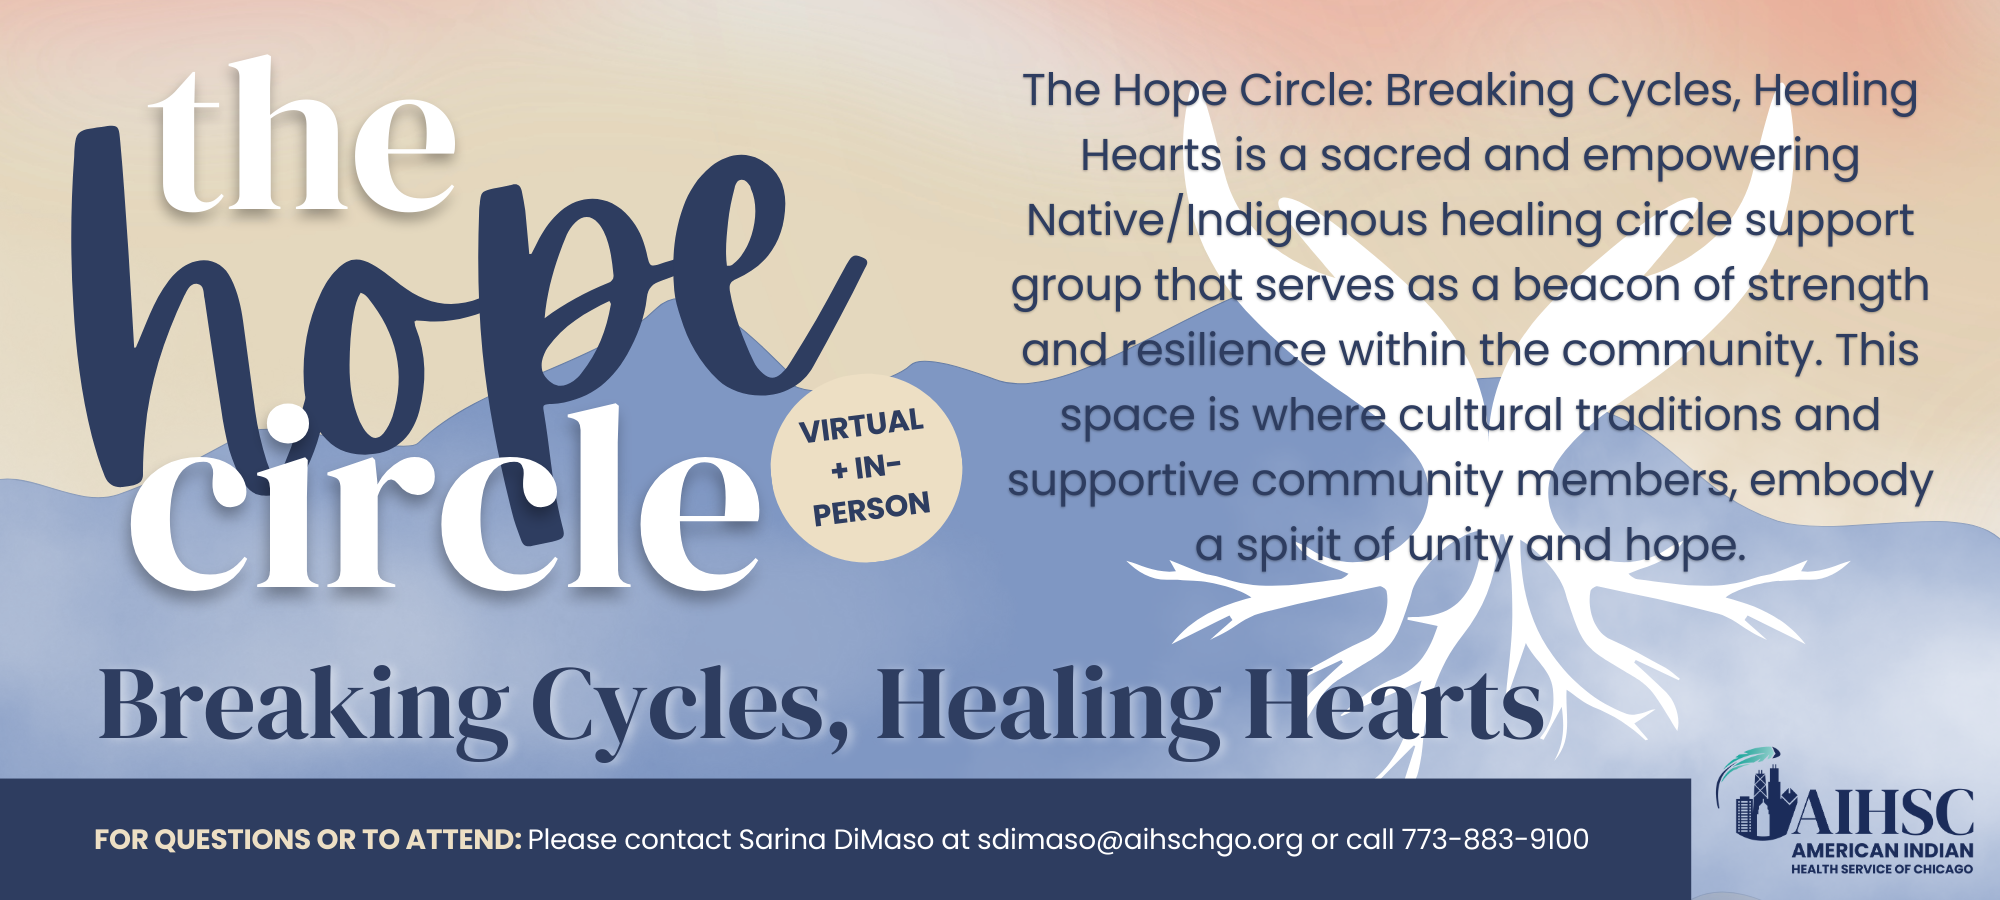 The Hope Circle: Breaking Cycles, Healing Hearts for Domestic Violence Prevention